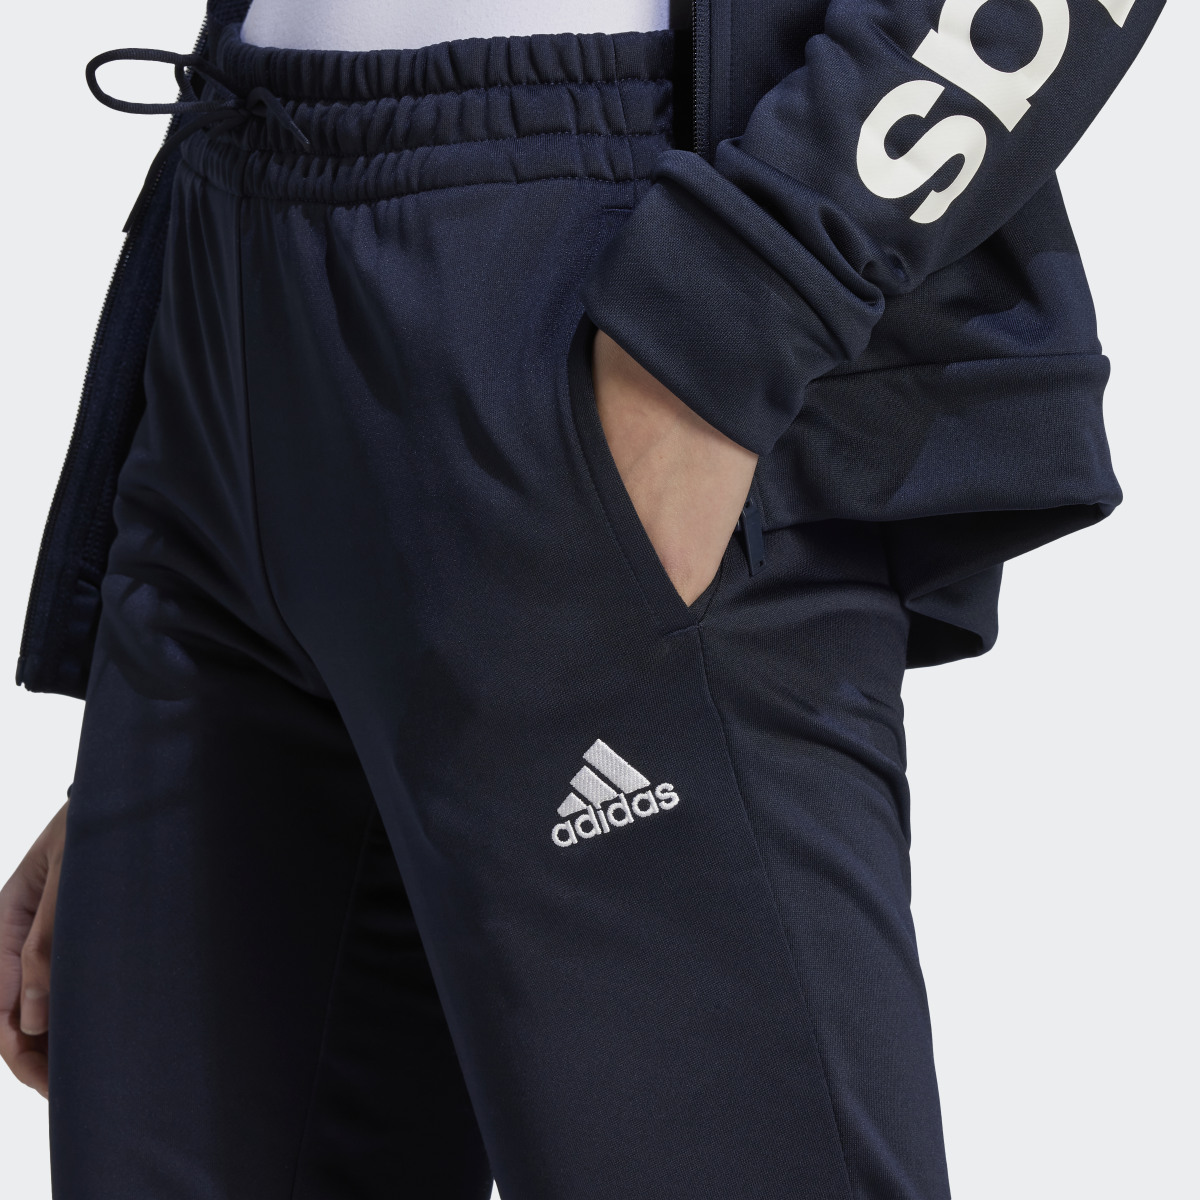 Adidas Track suit Linear. 9